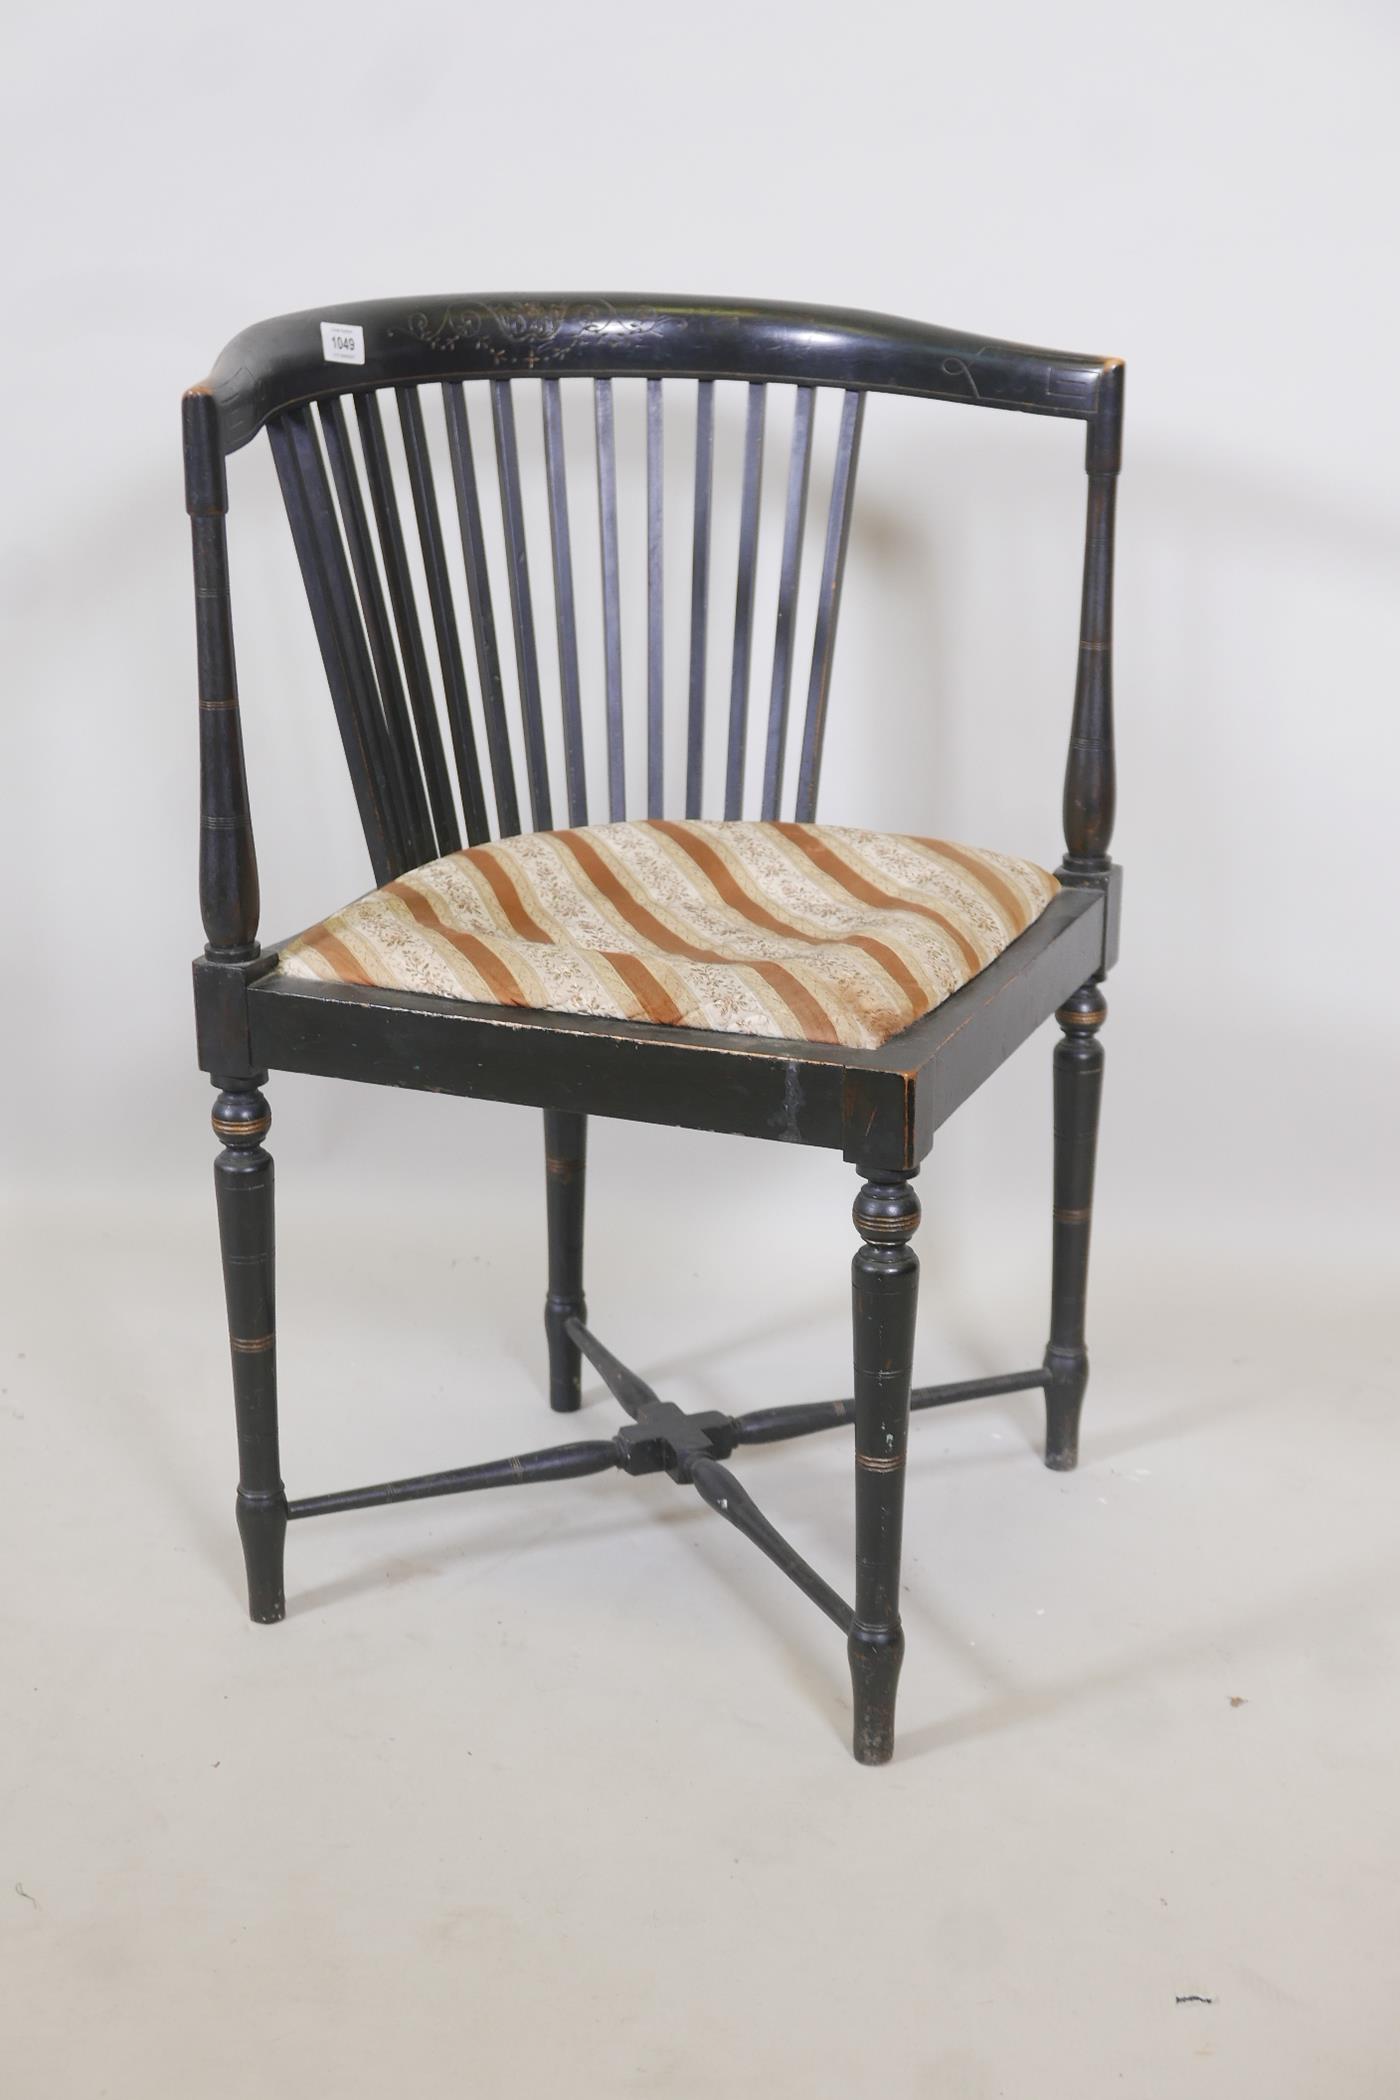 A C19th Aesthetic style ebonised corner chair with slat back, raised on ring turned tapering